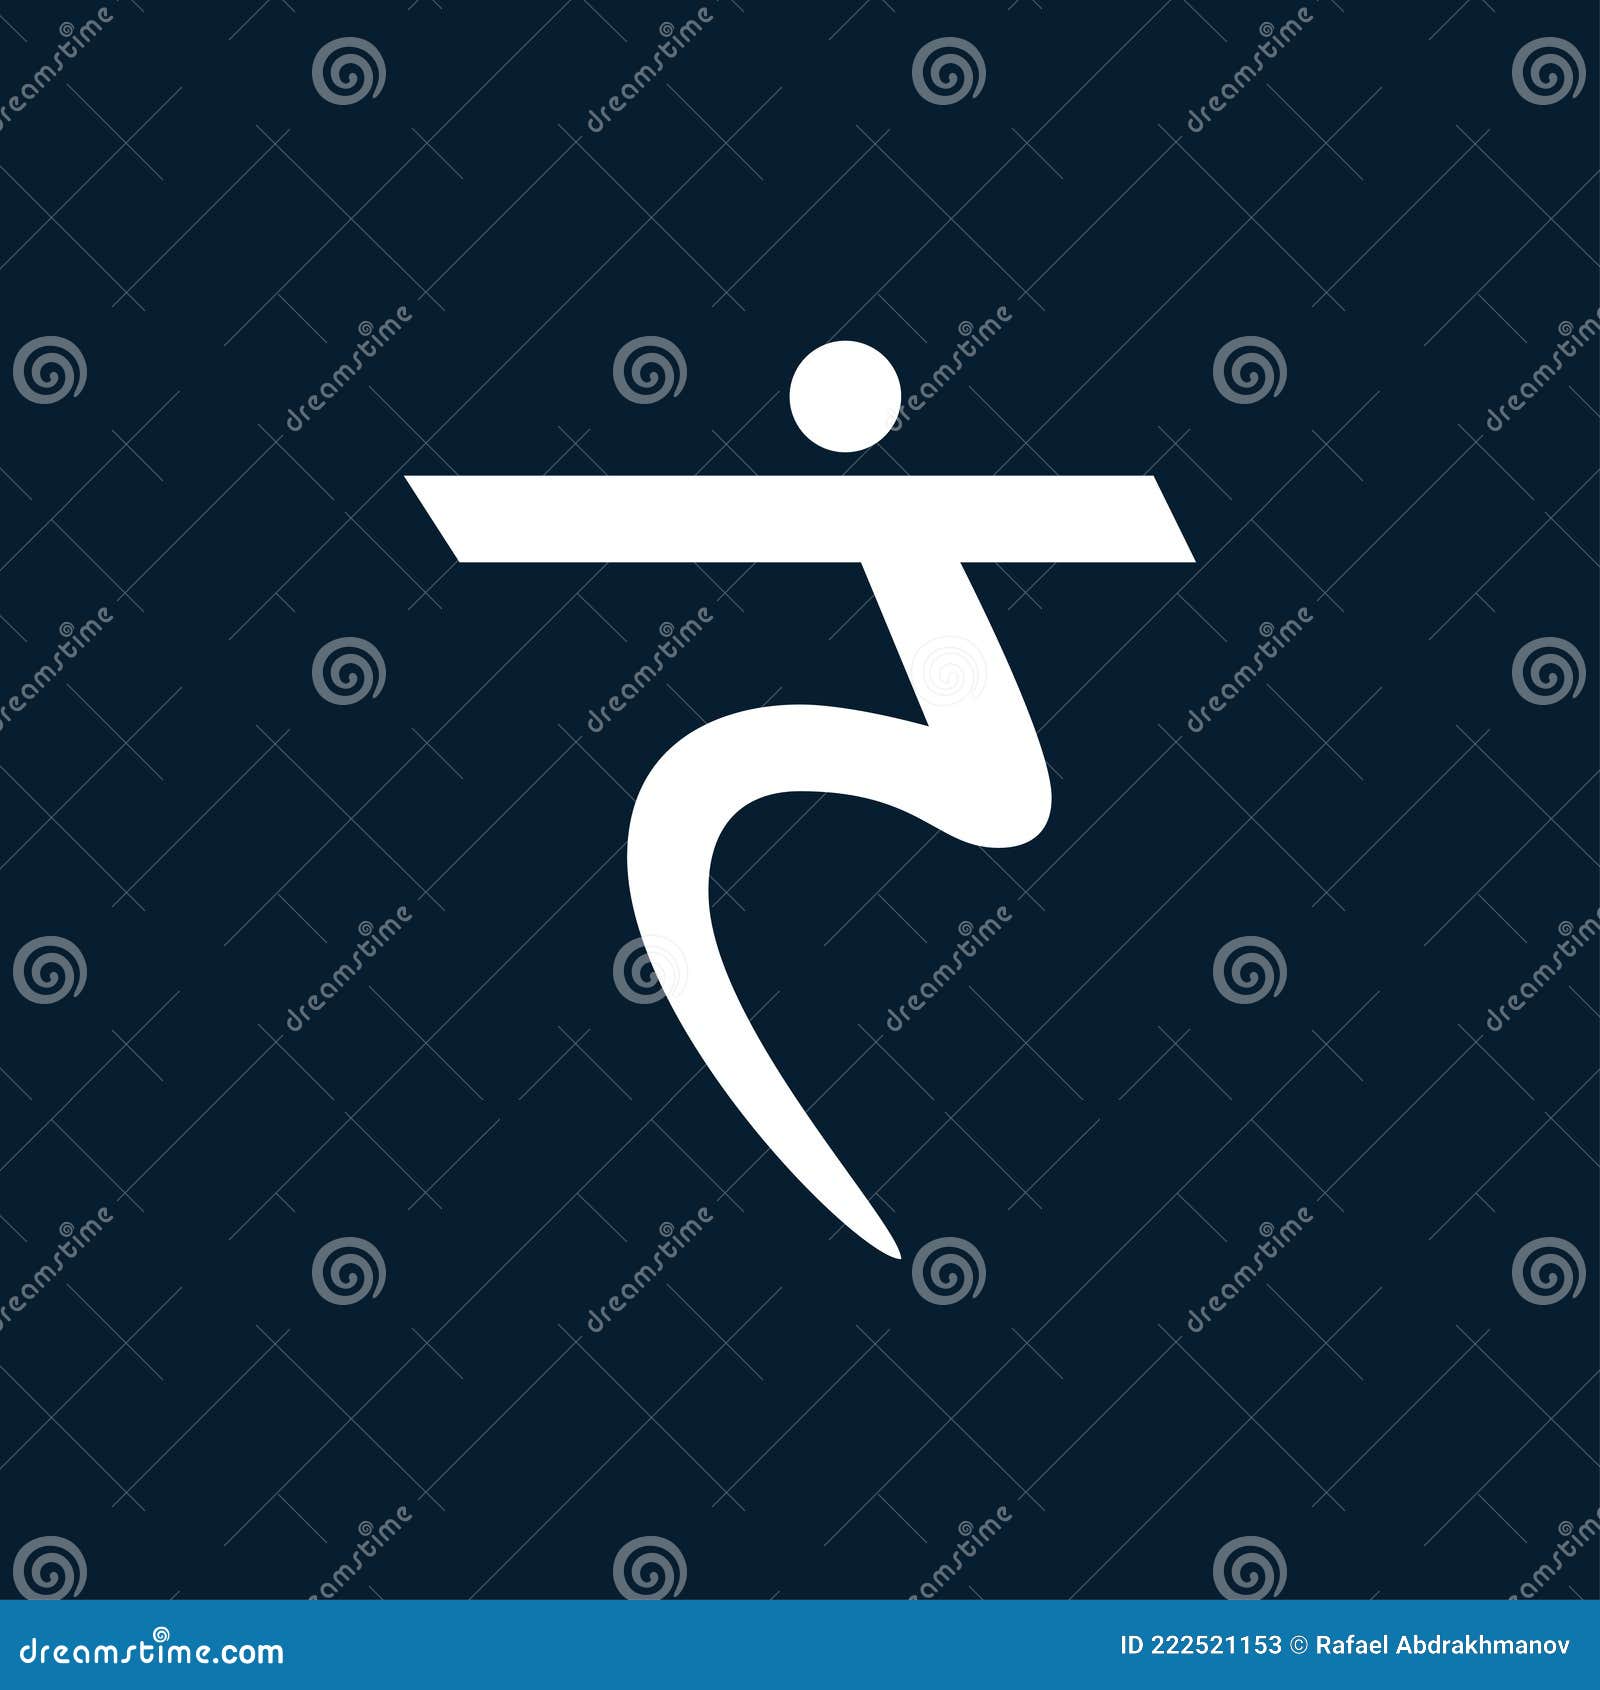 230 Rupee Symbol 3d Stock Photos Pictures  RoyaltyFree Images  iStock